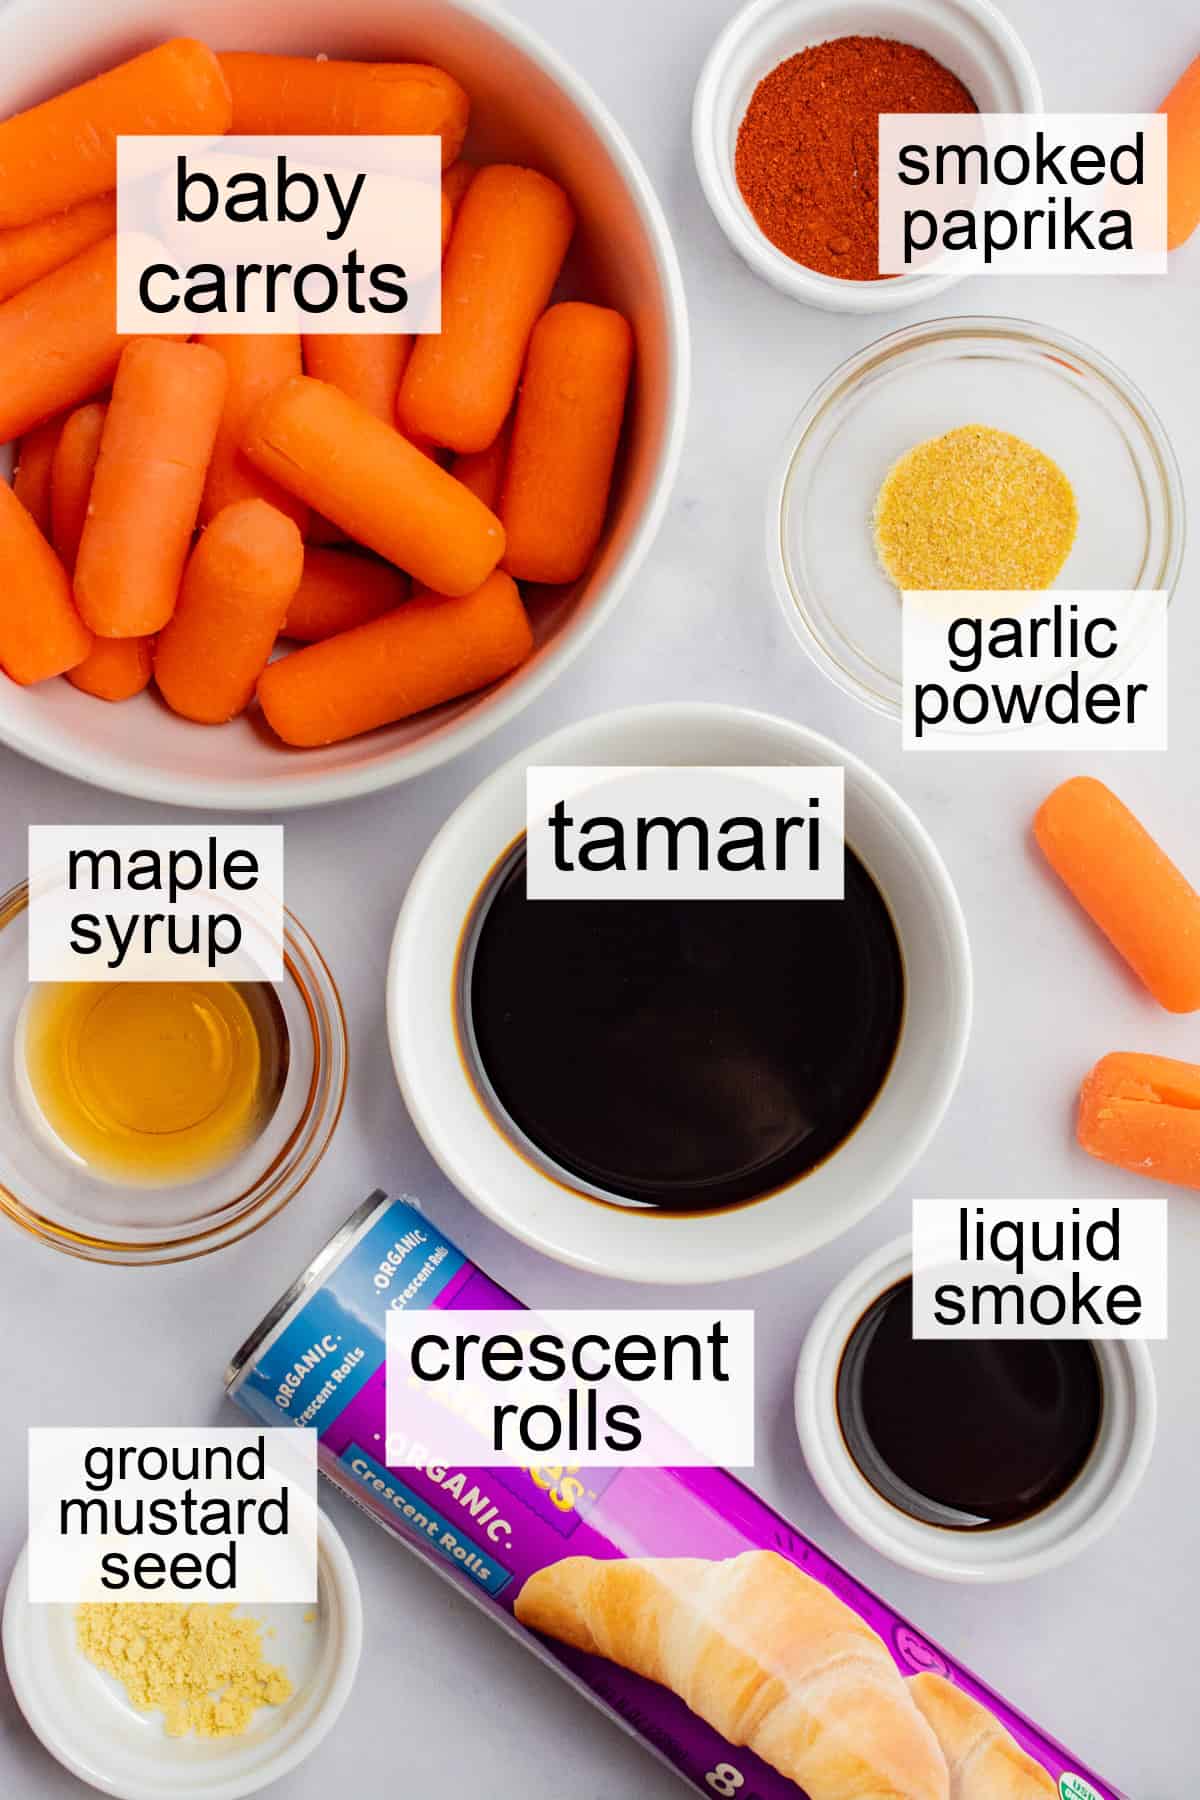 Ingredients separated in different bowls and labeled.